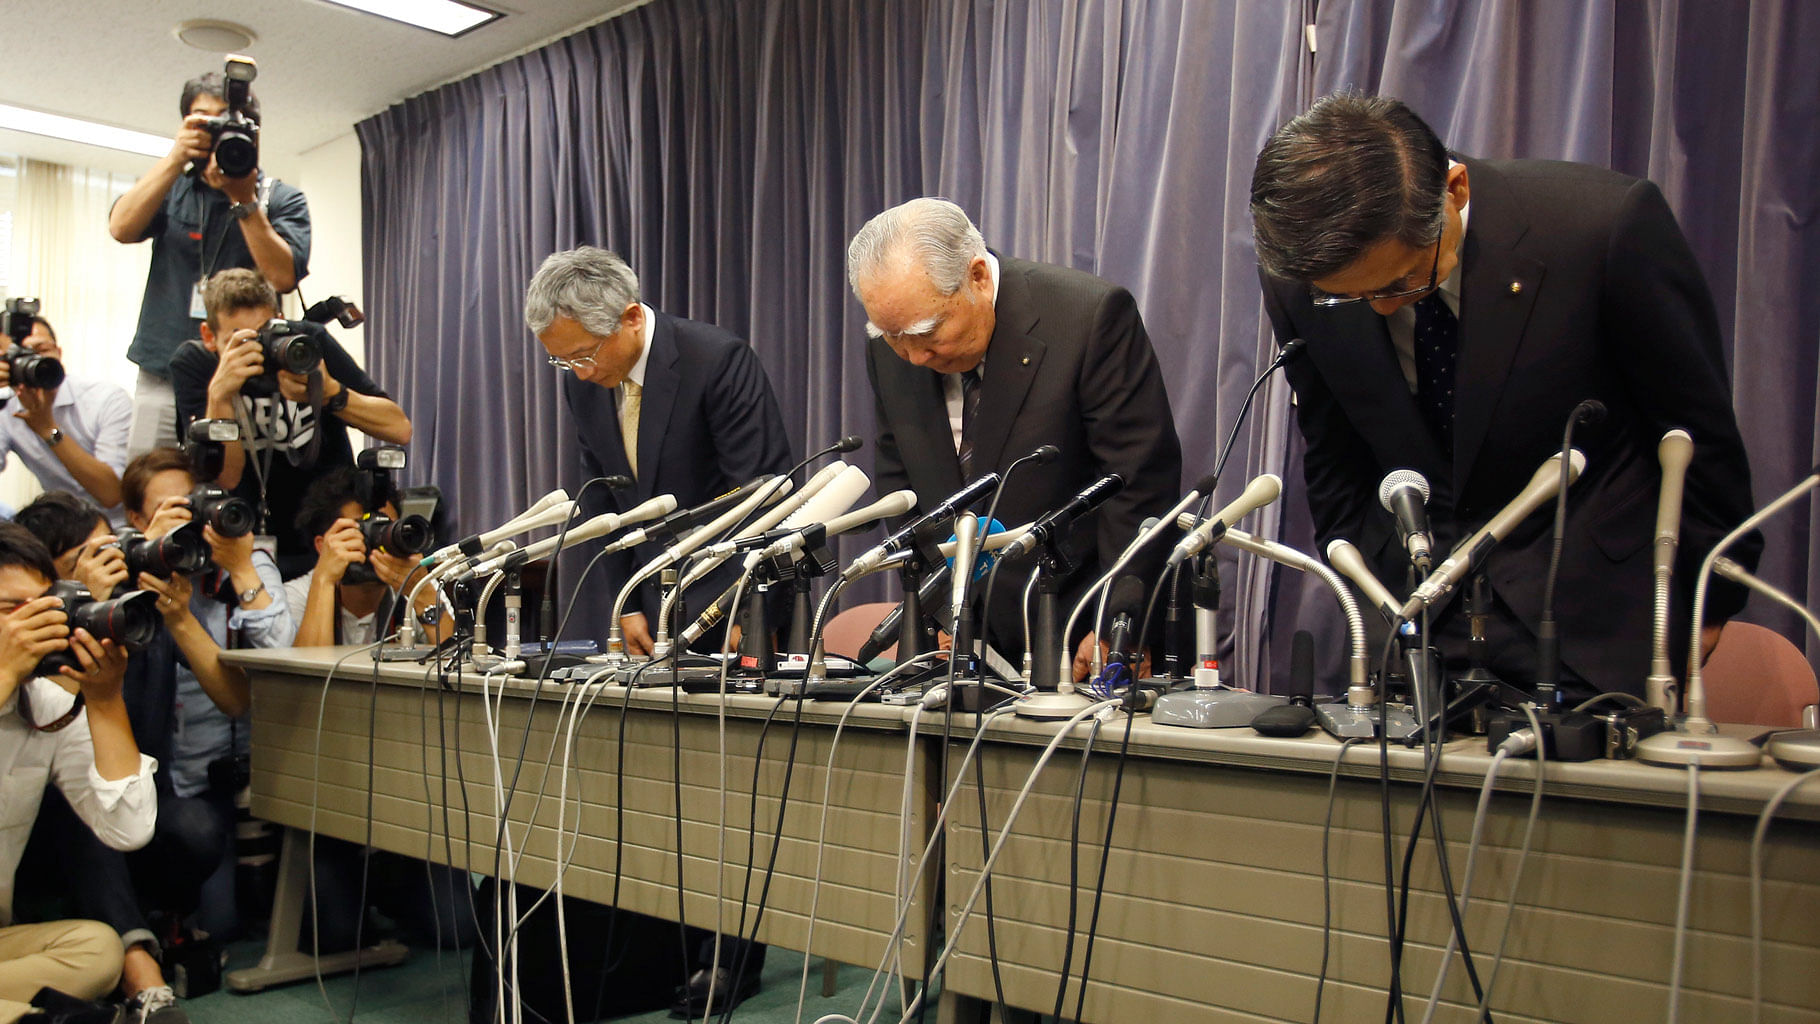 Suzuki Motor Corp. Chairman and Chief Executive Osamu Suzuki, center, bows with president Toshihiro Suzuki, right, and vice president Osamu Honda during a press conference in Tokyo, Wednesday, 18 May  2016. (Photo: AP)